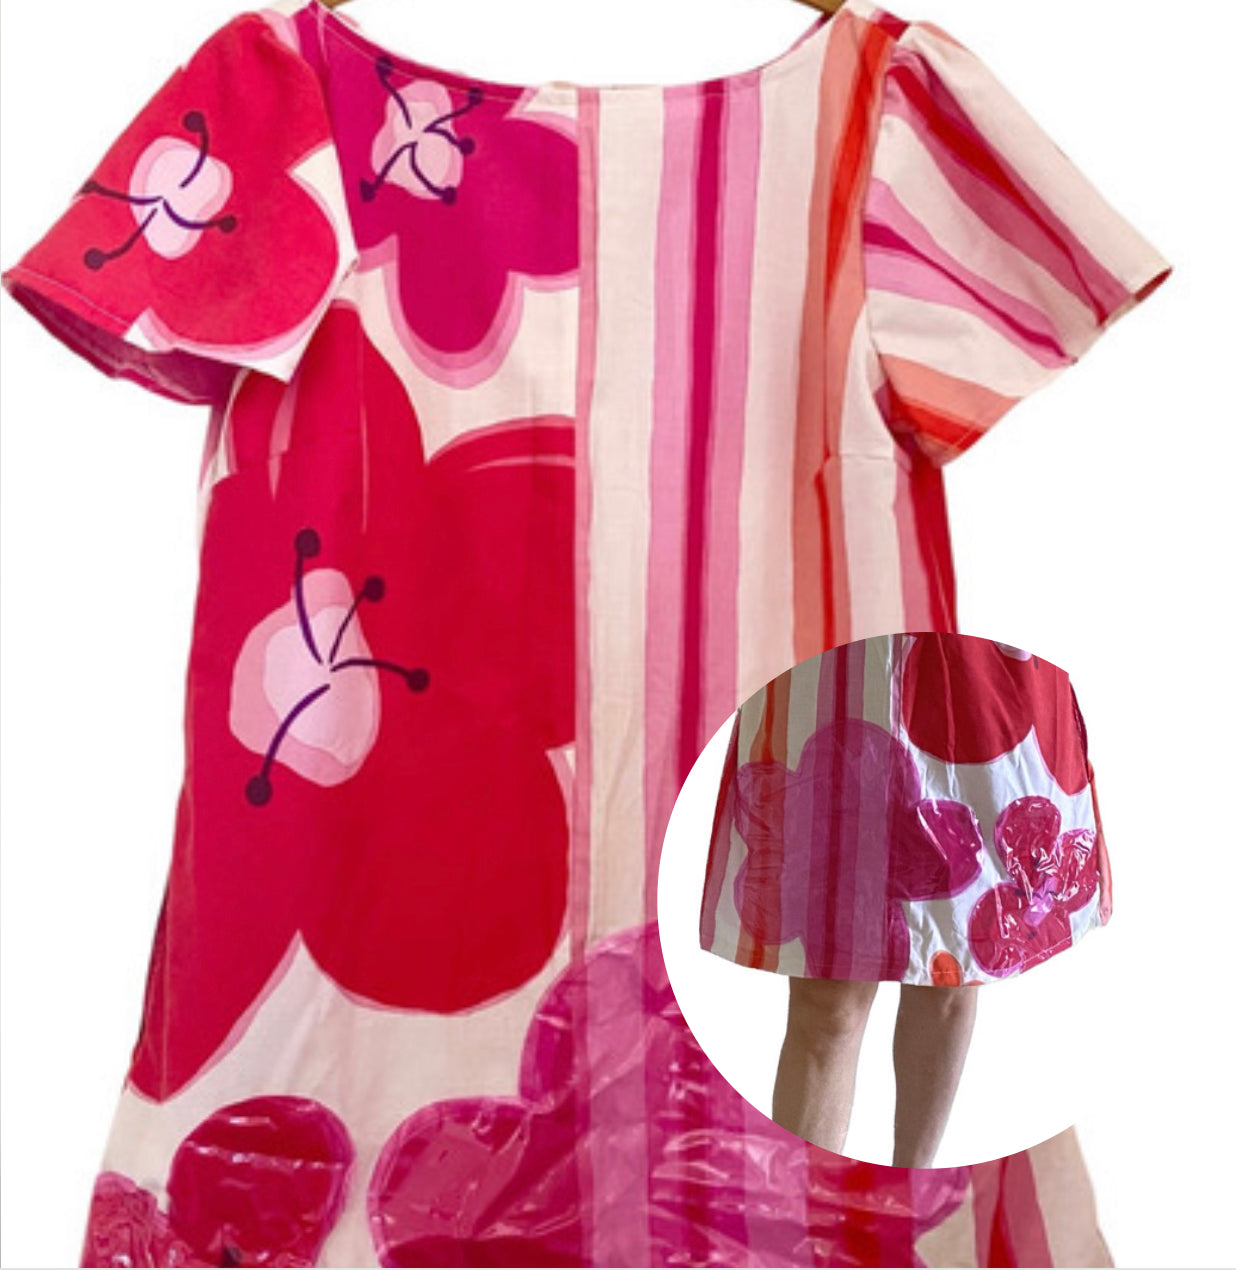 Dresses with recycled pool inflatables applique